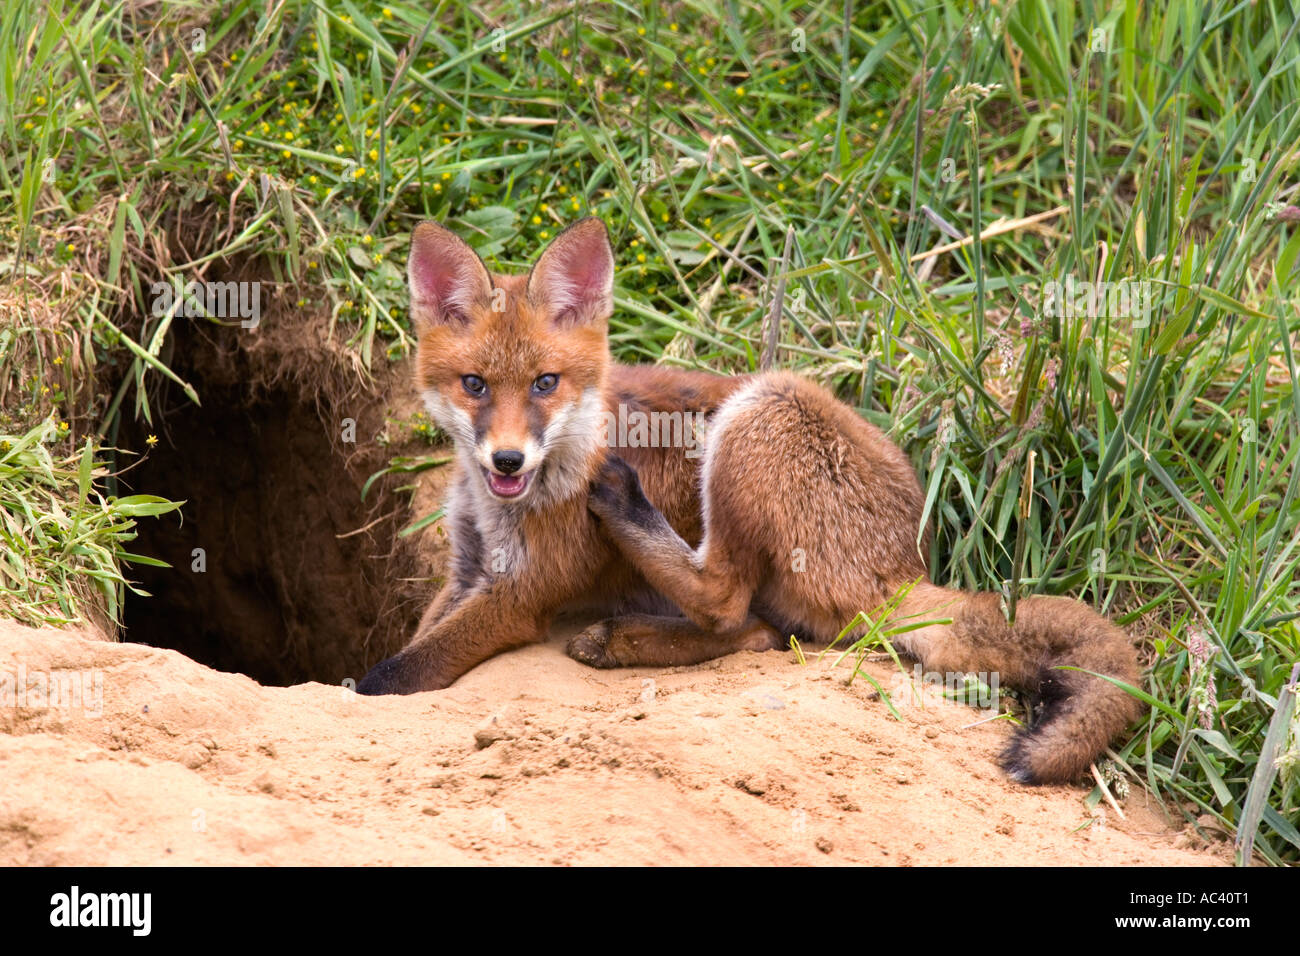 Red fox Vulpes vulpes outside earth potton bedfordshire looking alert with ears up Stock Photo